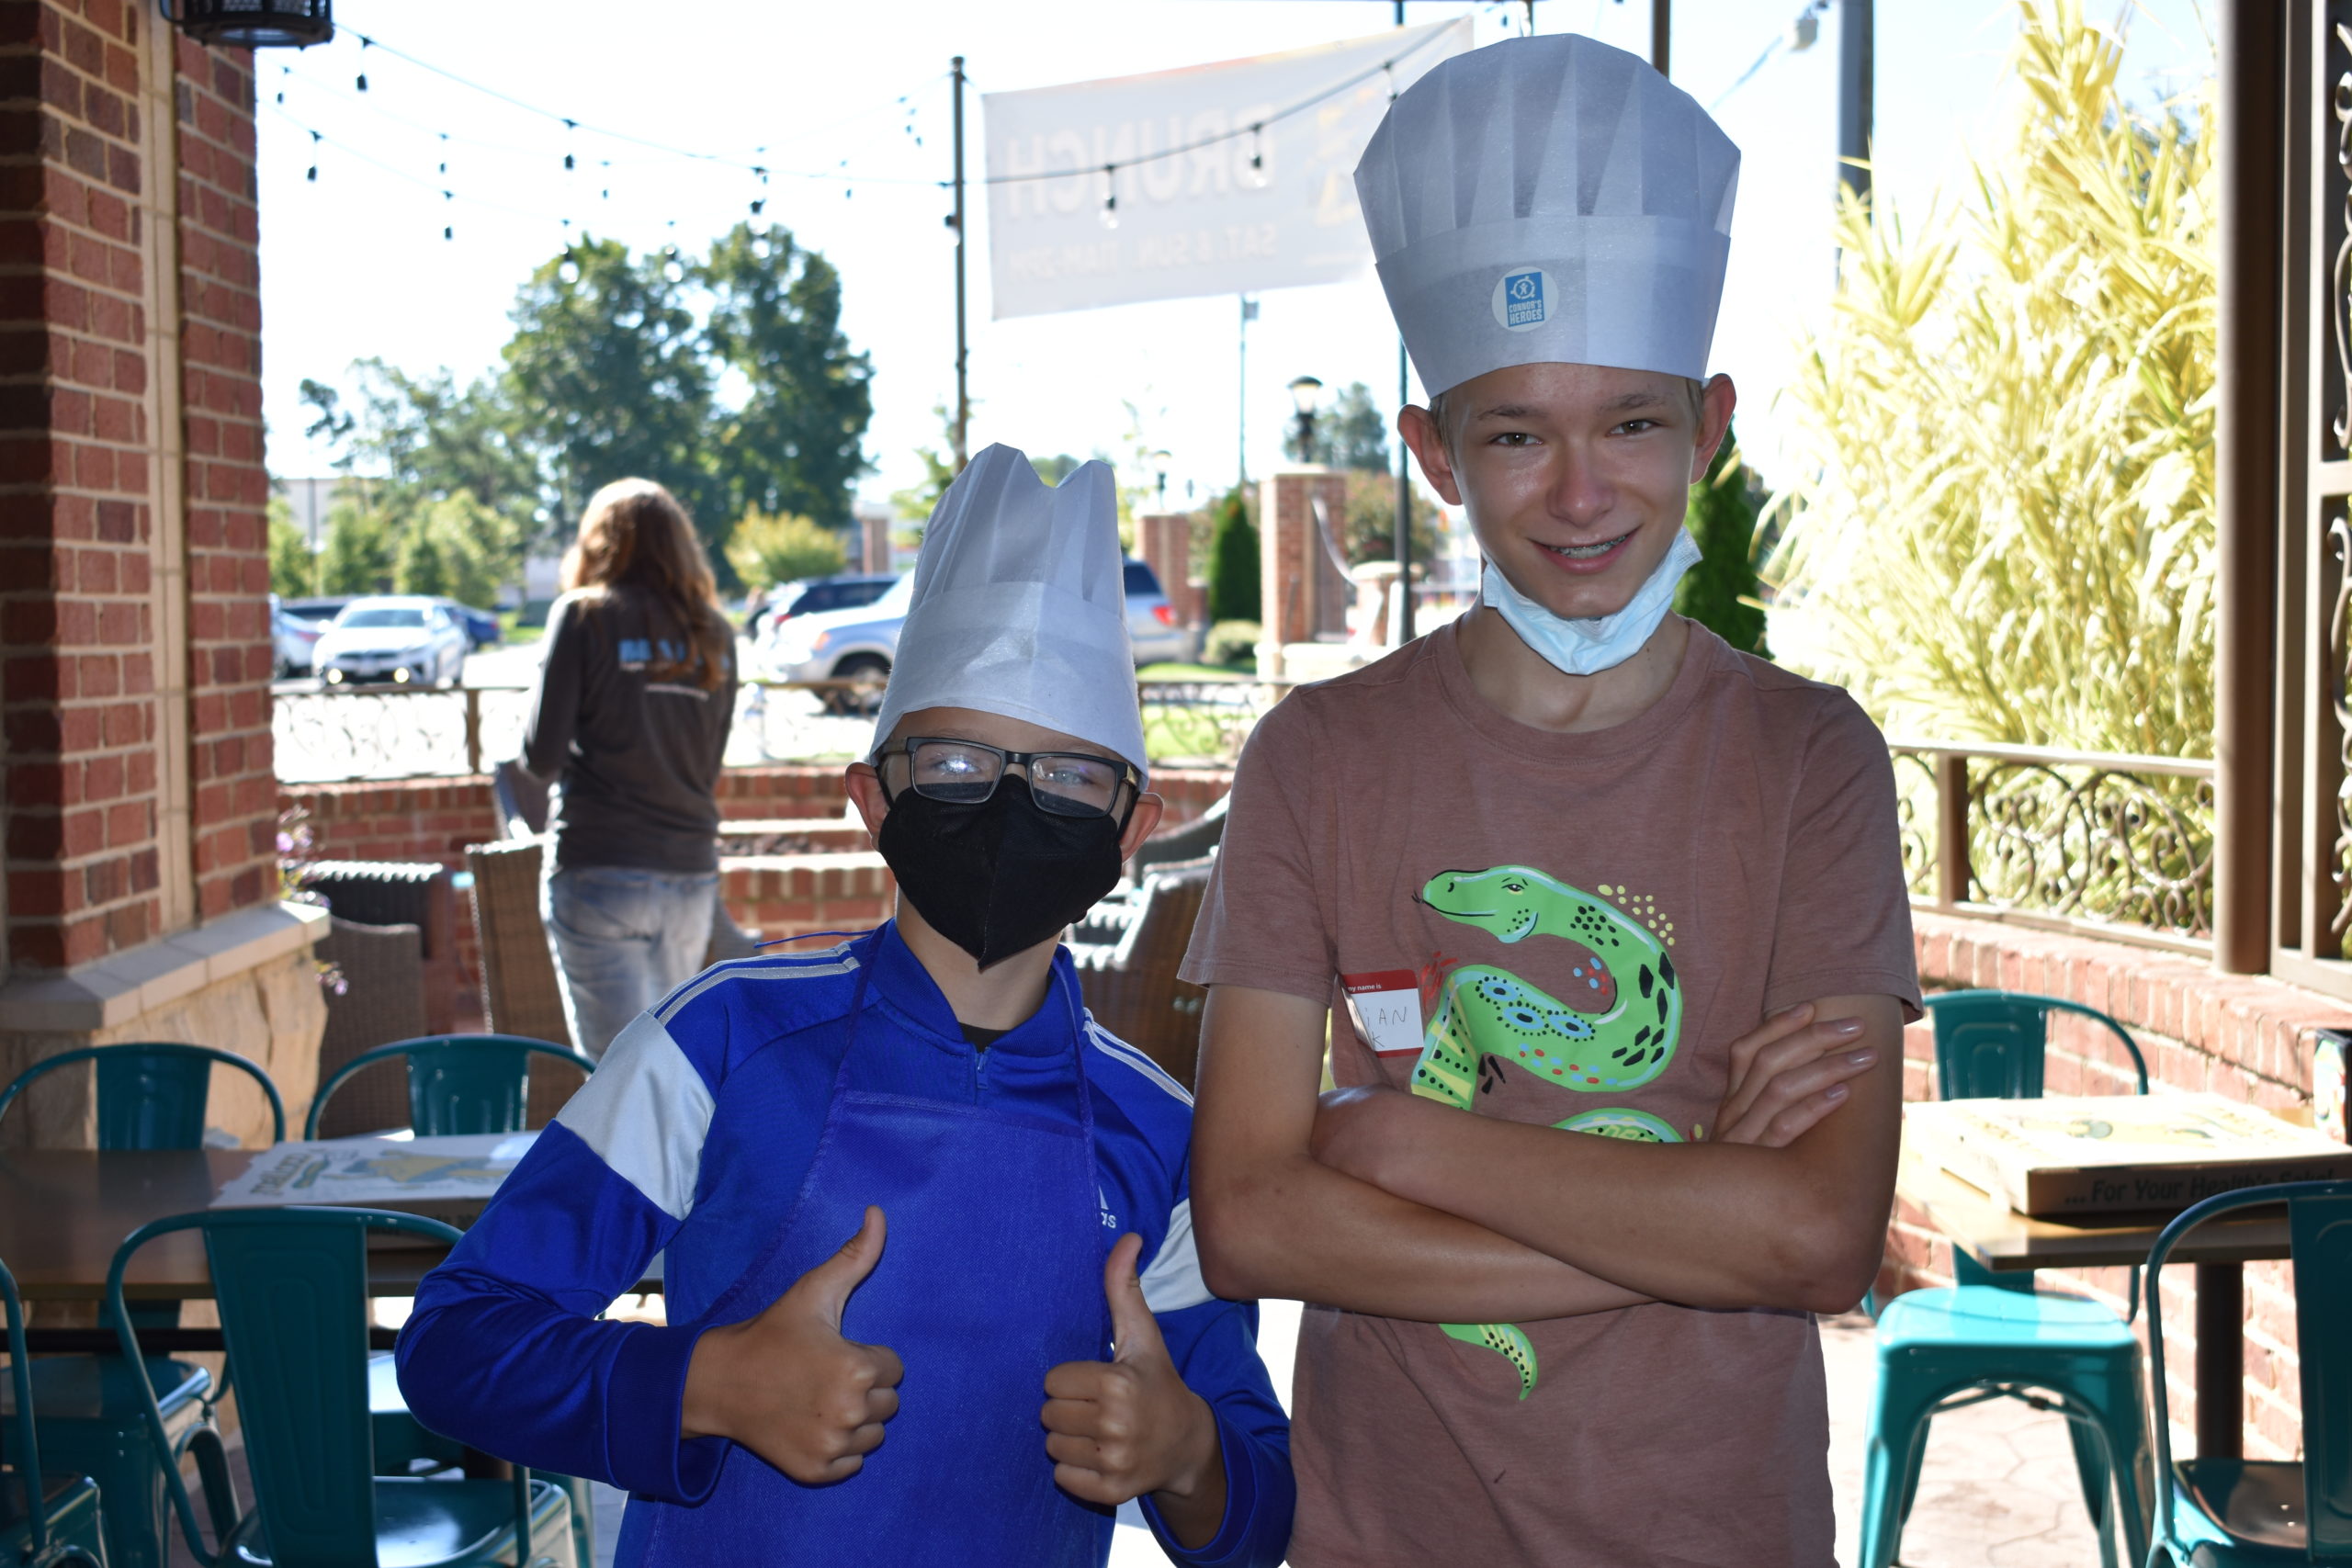 Image two boys wearing chef hats and standing outside at a restaurant